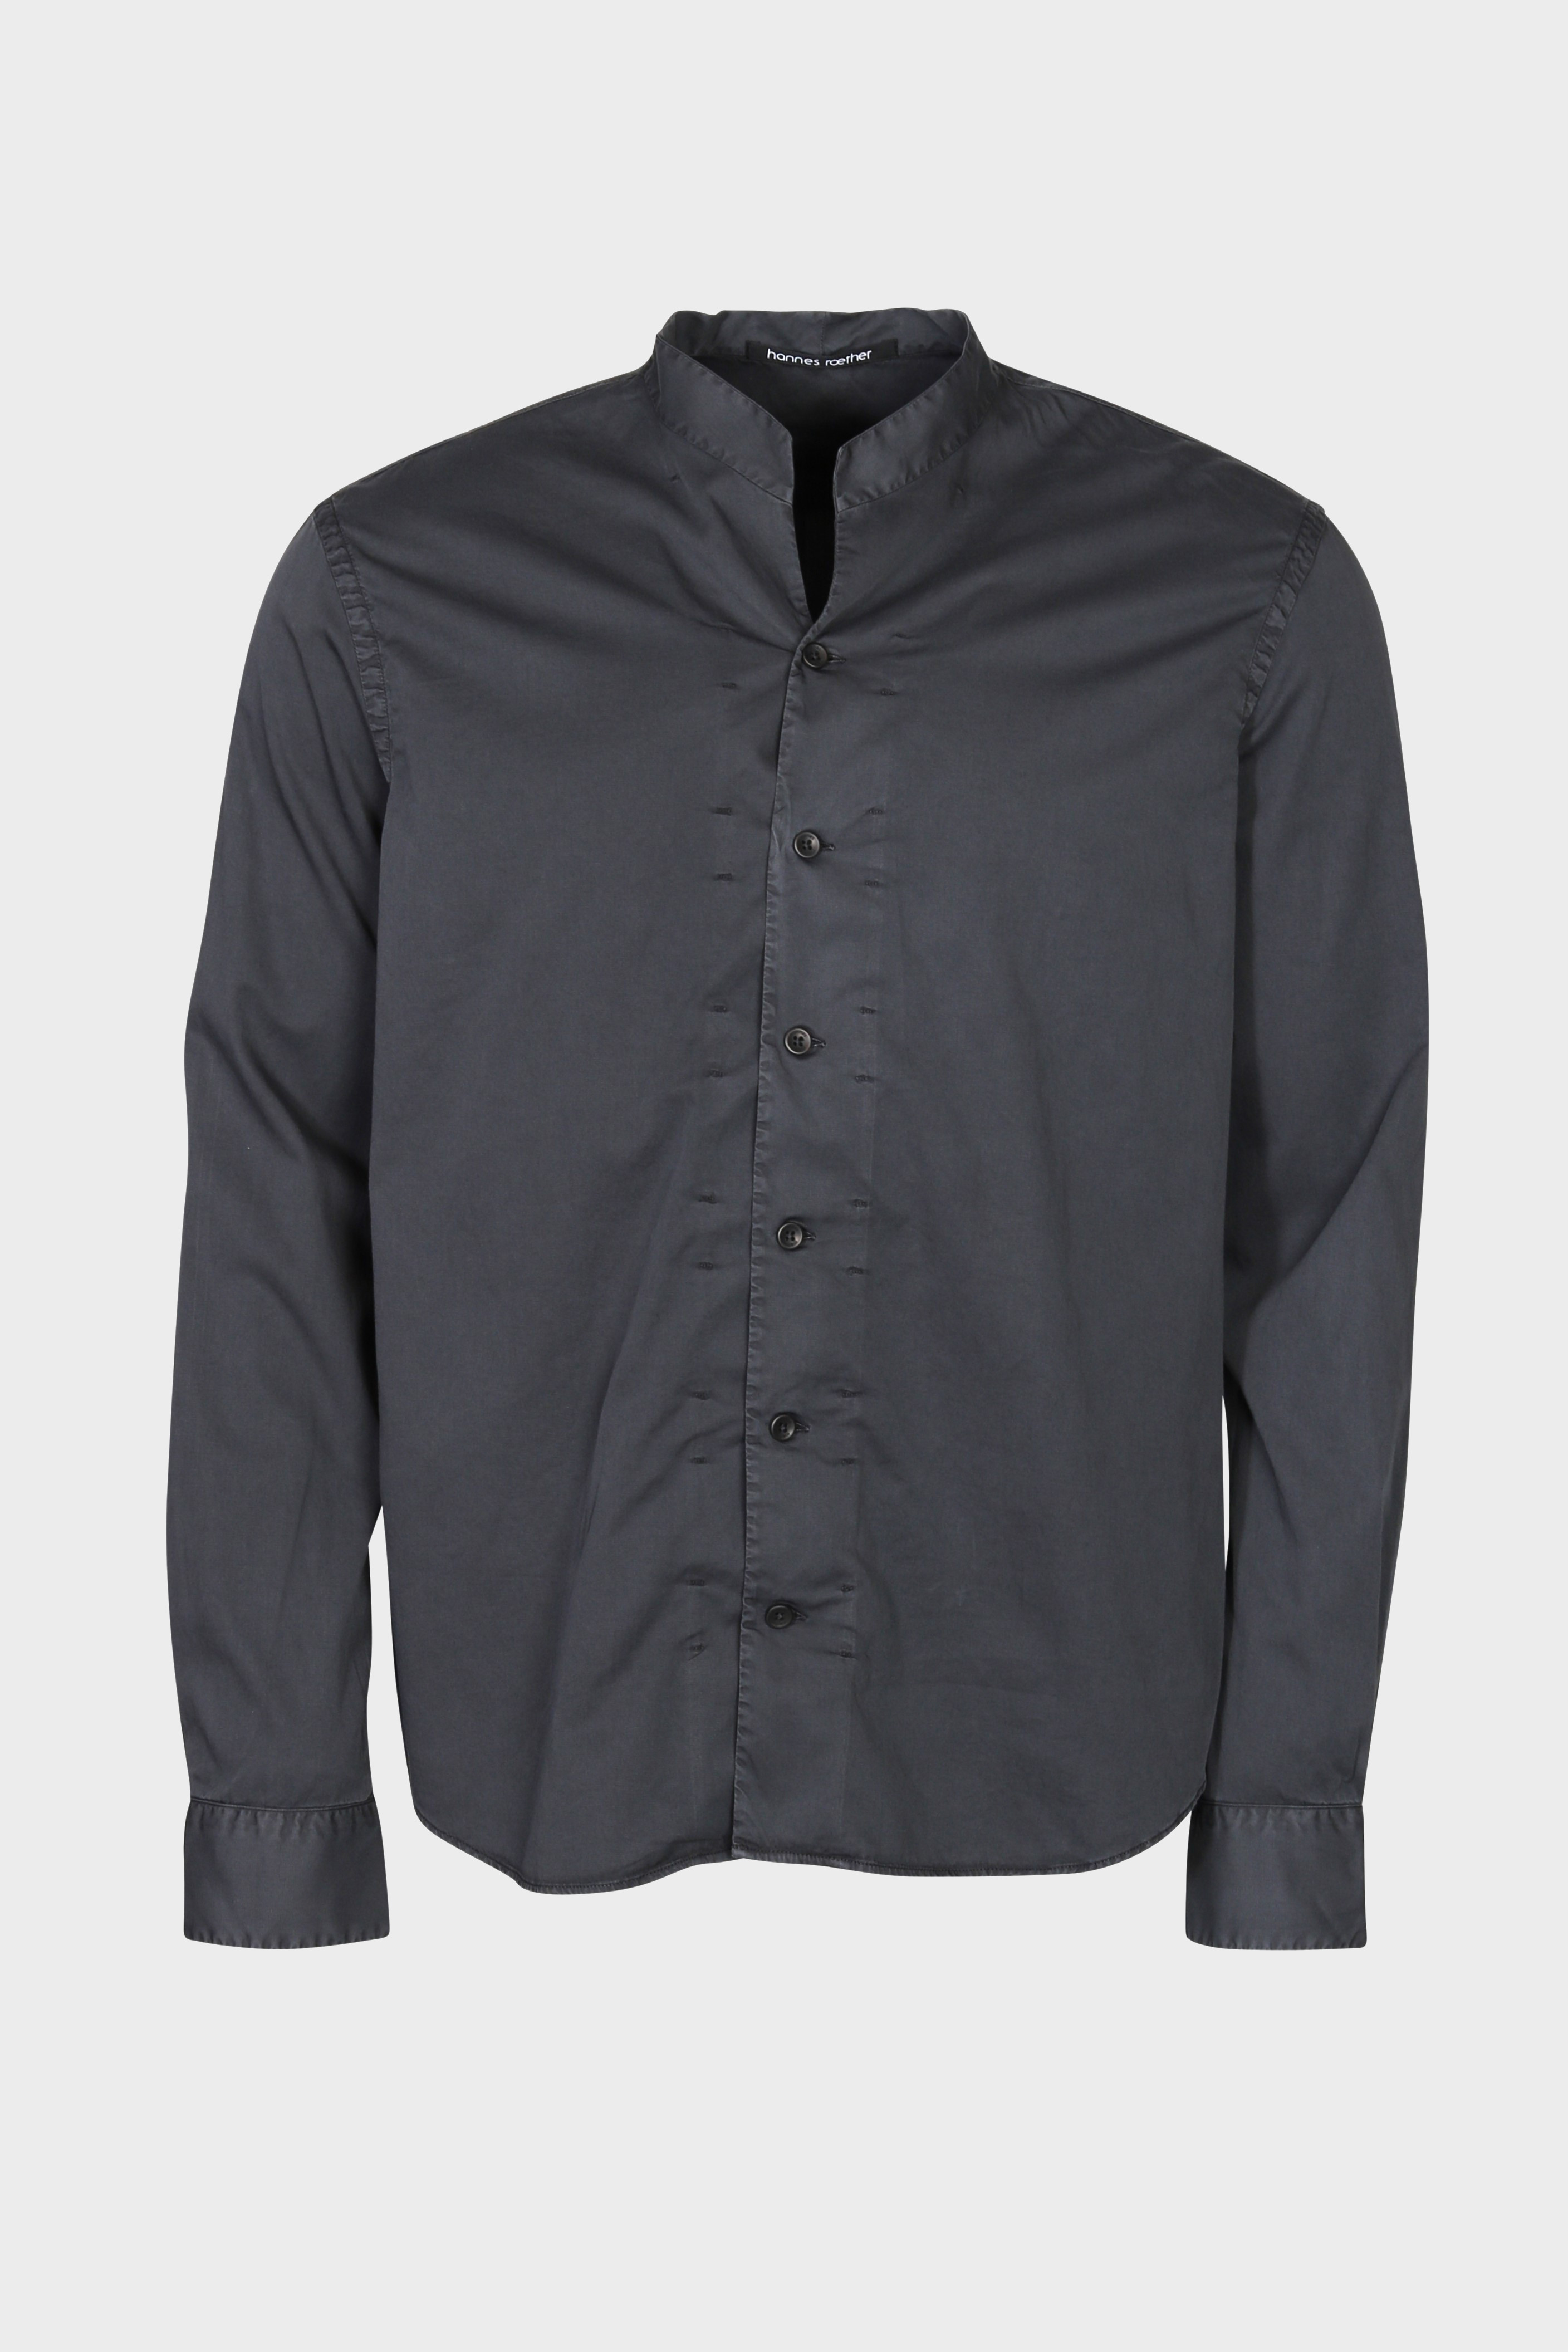 HANNES ROETHER Cotton Shirt in Black